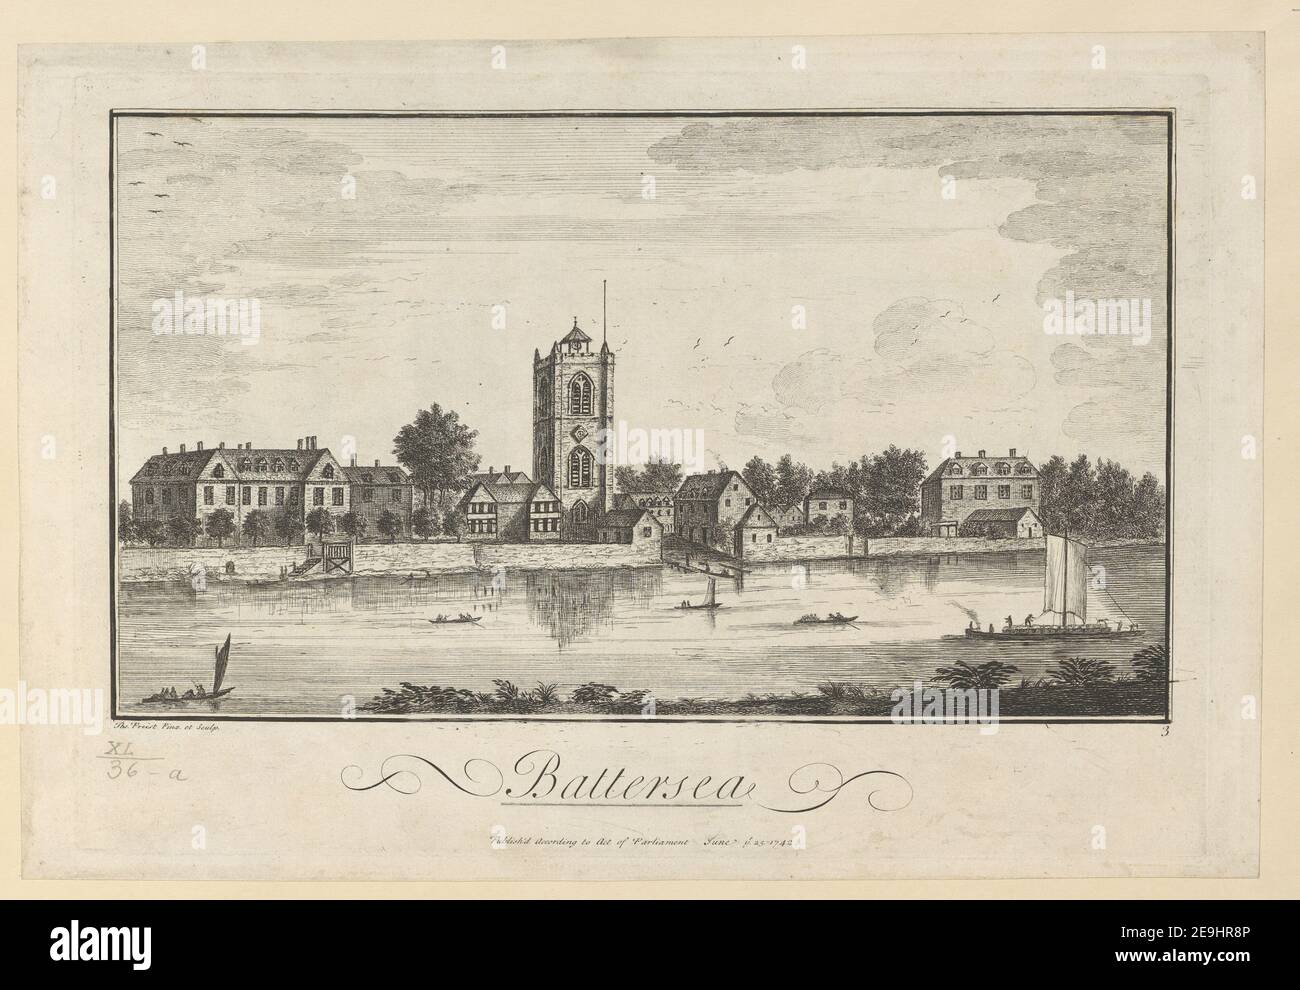 Battersea.  Author  Preist, Thomas 40.36.a. Place of publication: [London] Publisher: Publish'd according to Act of Parliament June y.e 25., Date of publication: 1742.  Item type: 1 print Medium: etching Dimensions: platemark 25.7 x 37.0 cm.  Former owner: George III, King of Great Britain, 1738-1820 Stock Photo